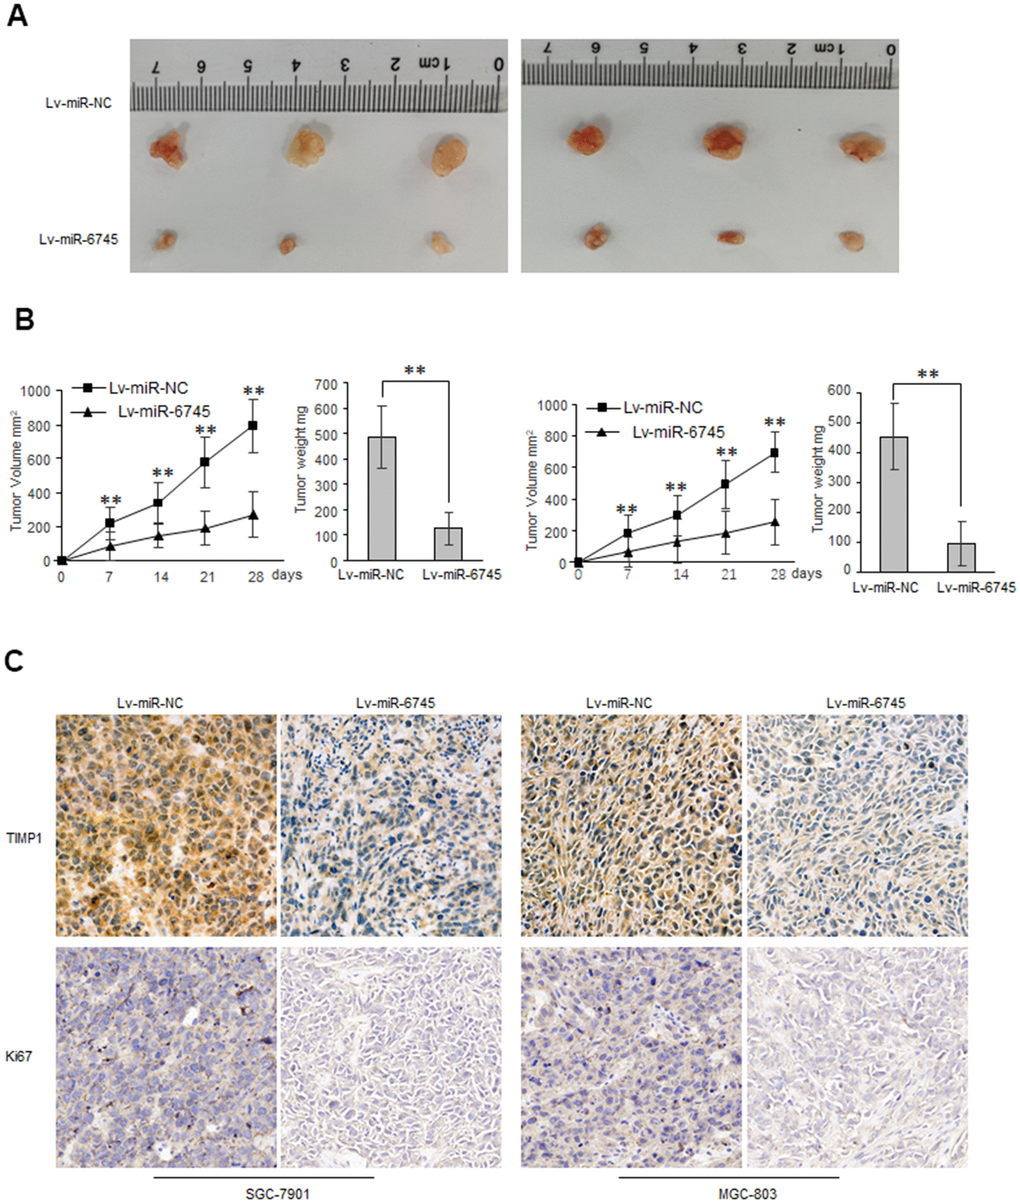 miR-6745 suppresses gastric tumor growth in vivo. Subcutaneous xenografts of GC cells infected with miR-6745 overexpressing lentivirus (Lv-miR-6745) or control lentivirus (Lv-miR-NC). (A) Images of the tumors at autopsy from nude mice are presented. (B) Tumor volumes and average weight of xenografted tumors were measured. (C) Immunohistochemical (IHC) staining of TIMP1 and Ki67 in xenografted tumors from Lv-miR-6745 cells or control cells. Data represent the means ± SEM. **P 